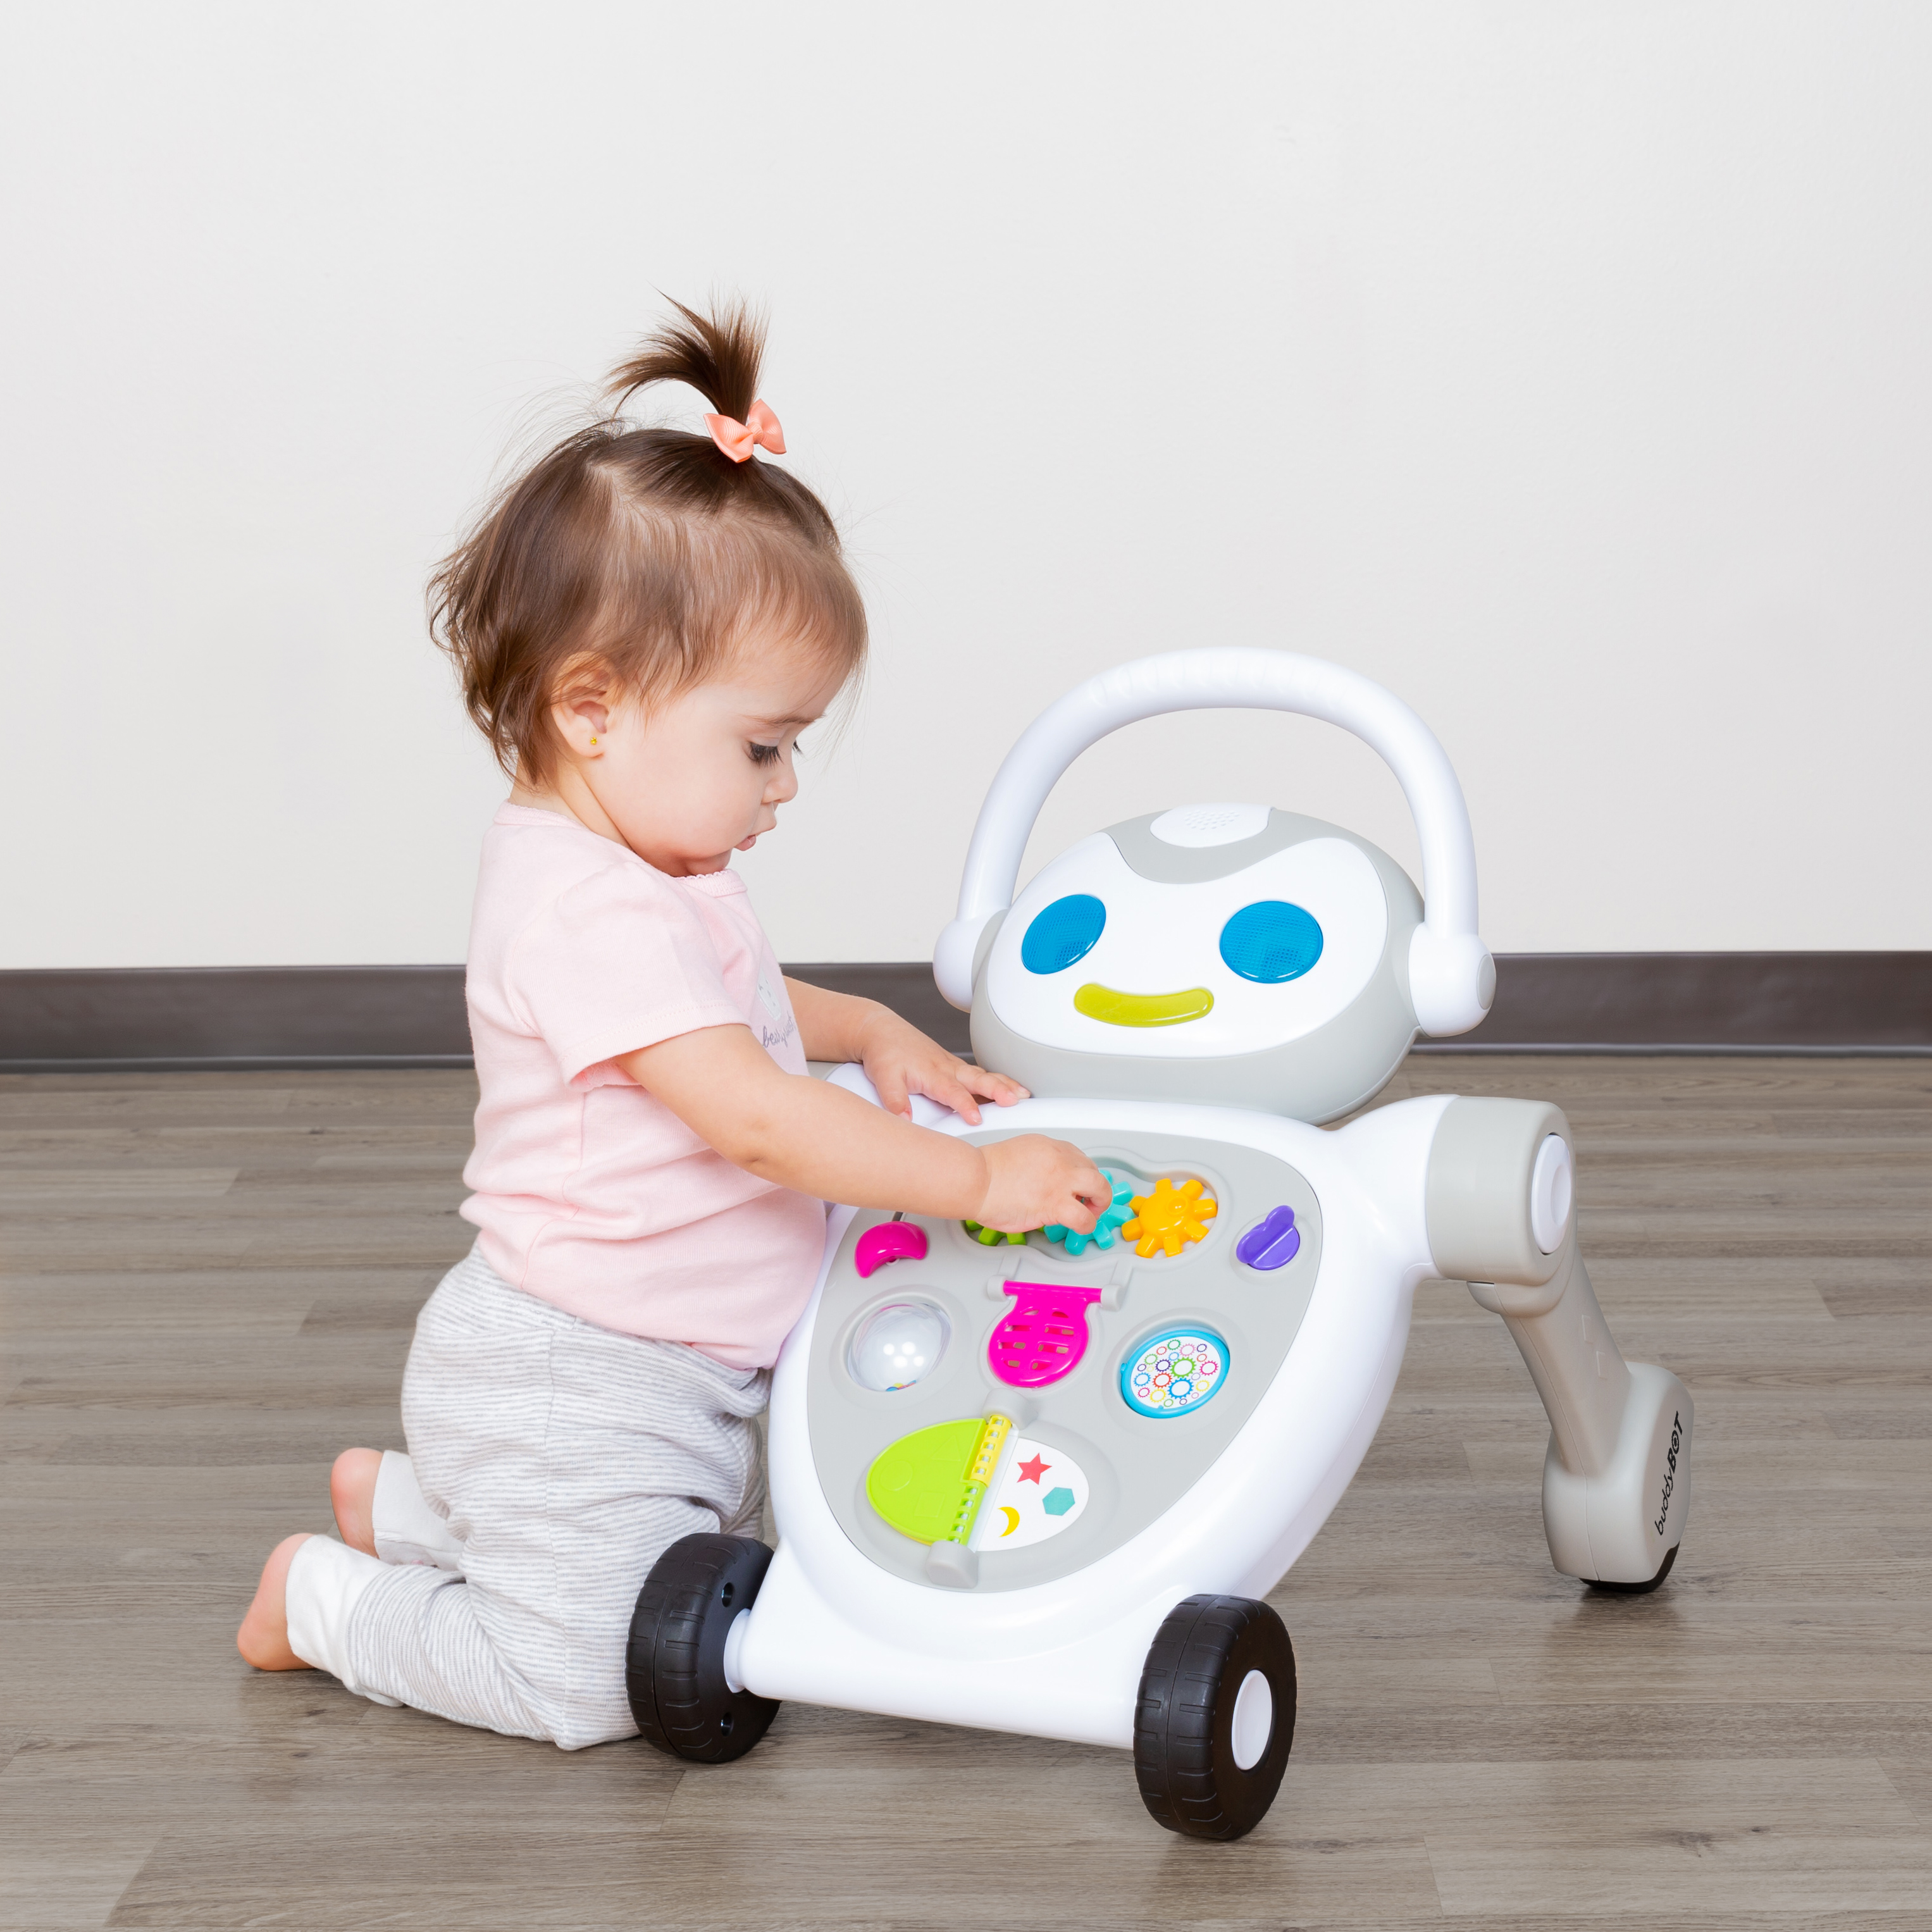 Smart Steps by Baby Trend Buddy Bot 2-in-1 Push Walker and STEM Learning - image 3 of 10